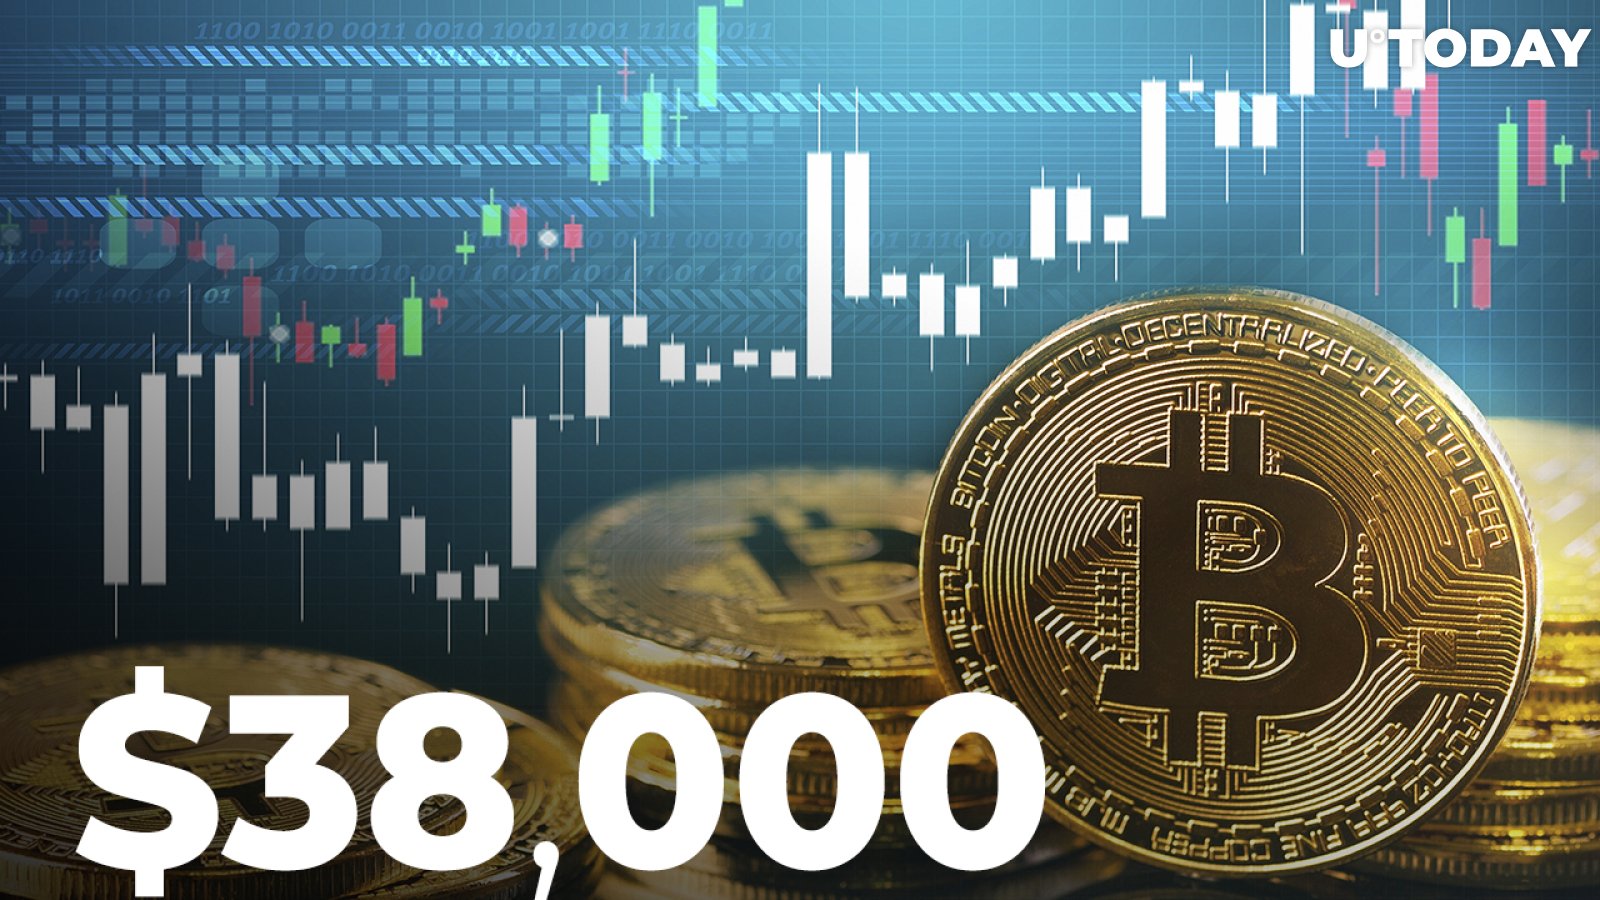 Bitcoin Recovers to $38,000, Correlated with US Futures Ahead of Fed Meeting Results